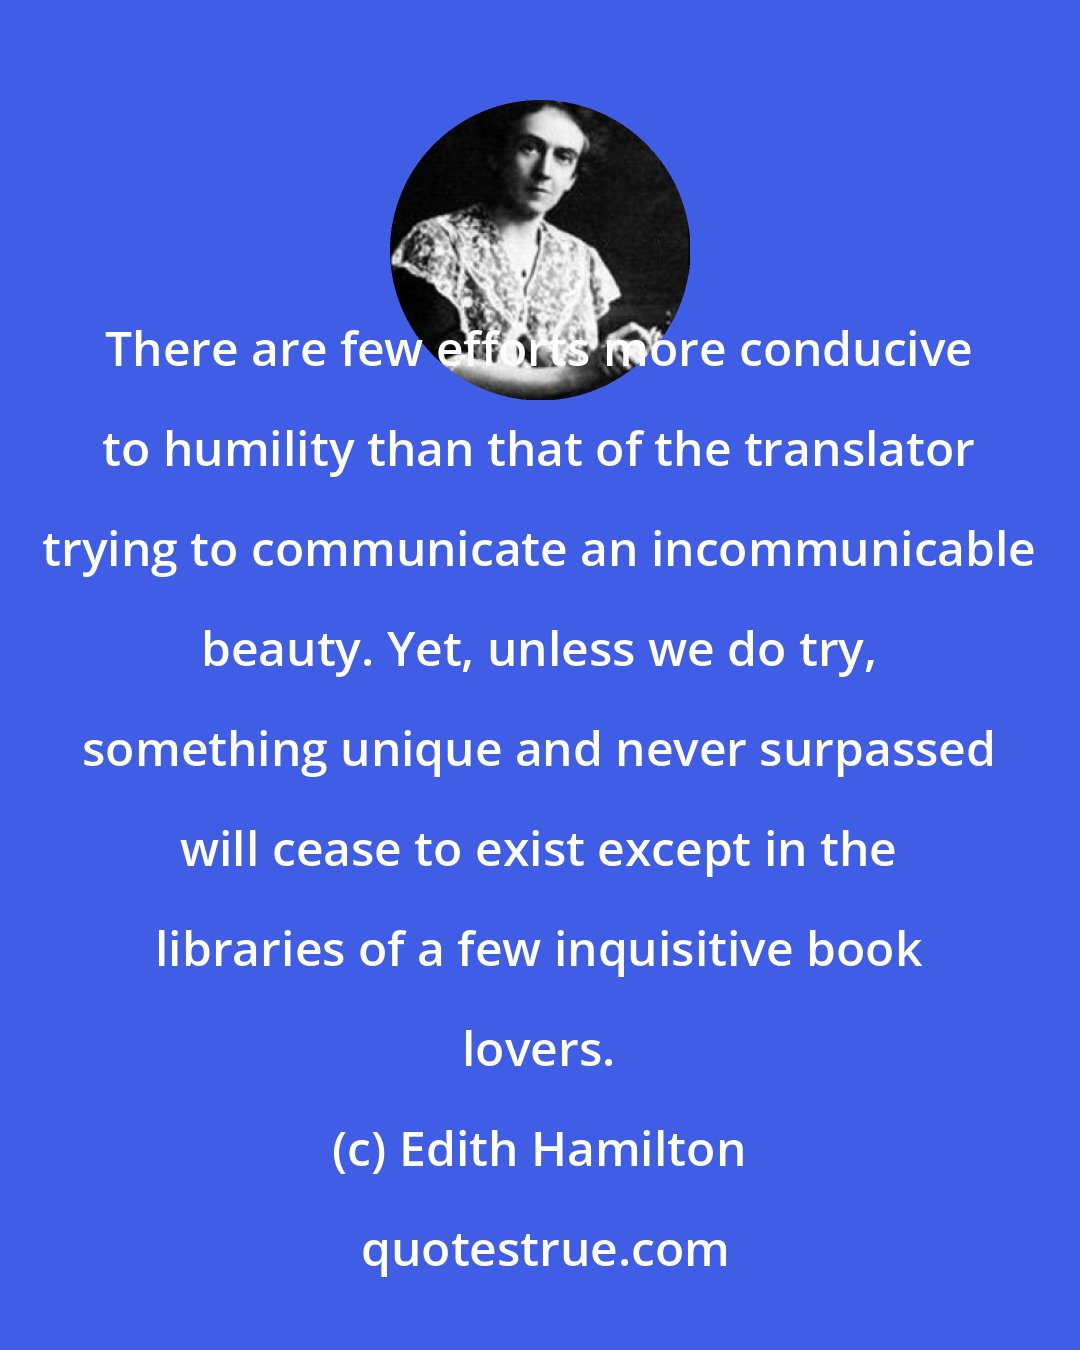 Edith Hamilton: There are few efforts more conducive to humility than that of the translator trying to communicate an incommunicable beauty. Yet, unless we do try, something unique and never surpassed will cease to exist except in the libraries of a few inquisitive book lovers.